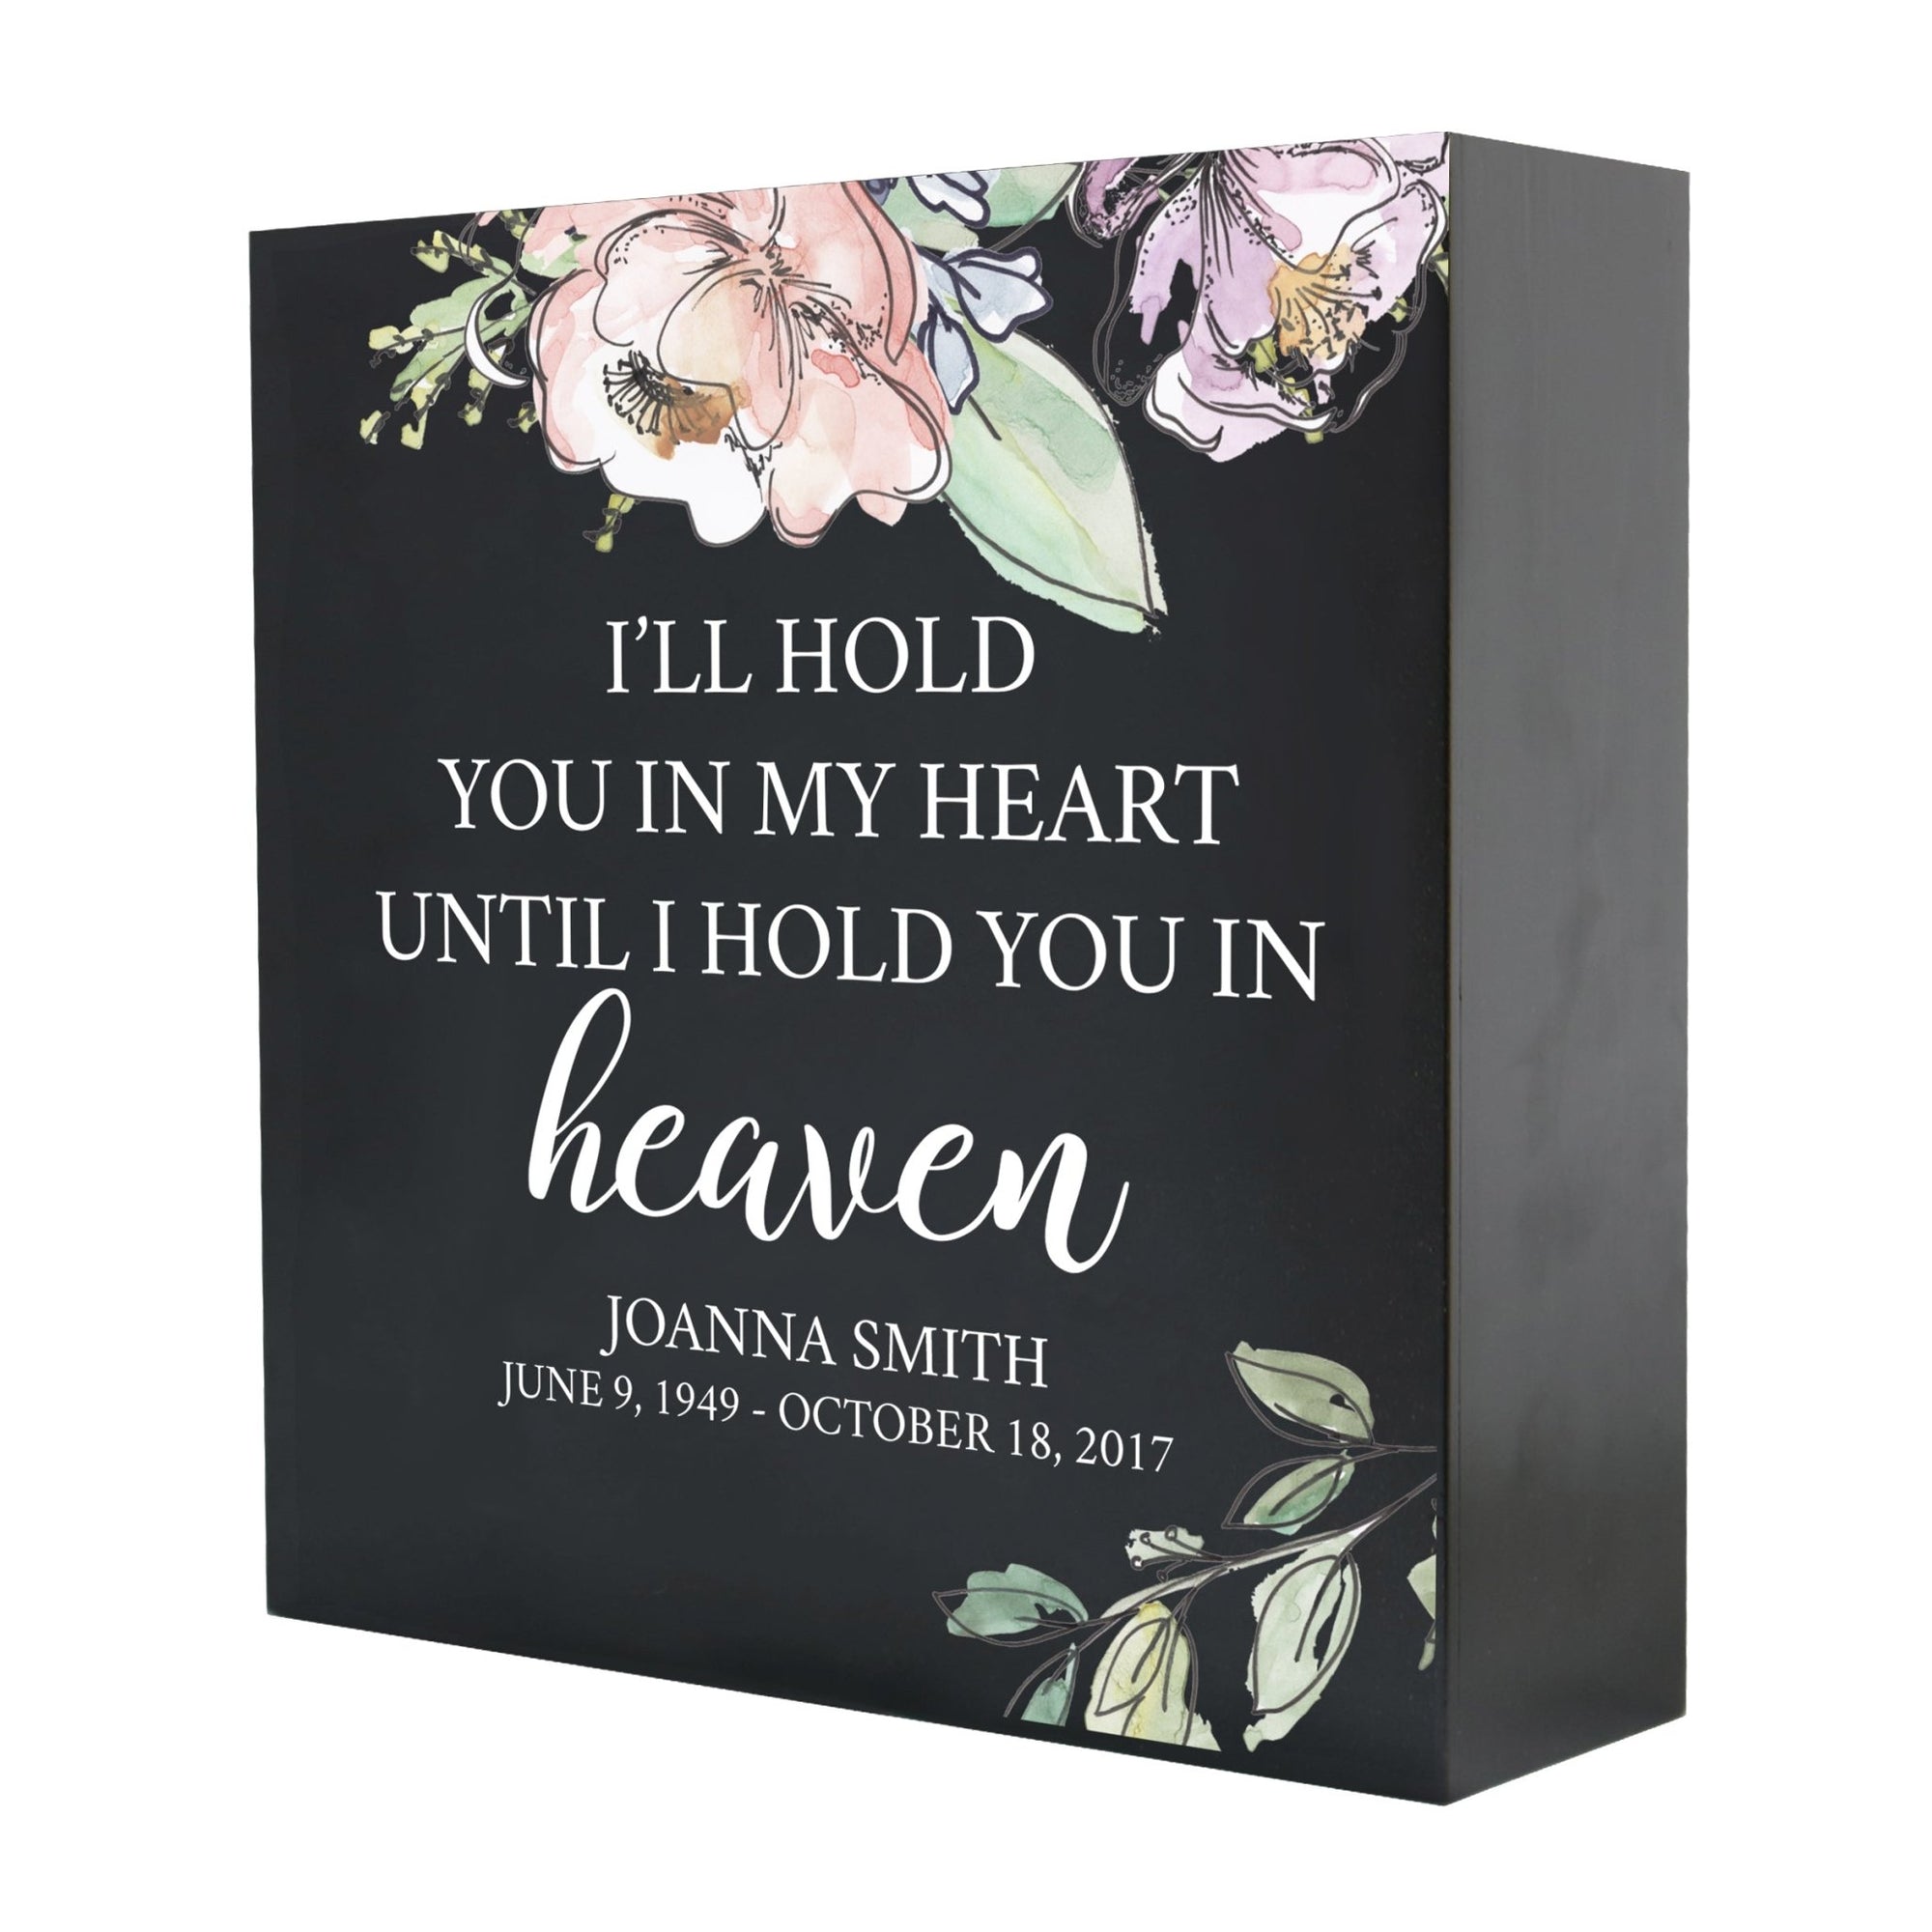 Personalized Modern Inspirational Memorial Wooden Shadow Box and Urn 10x10 holds 189 cu in of Human Ashes - I’ll Hold You (Heart) - LifeSong Milestones